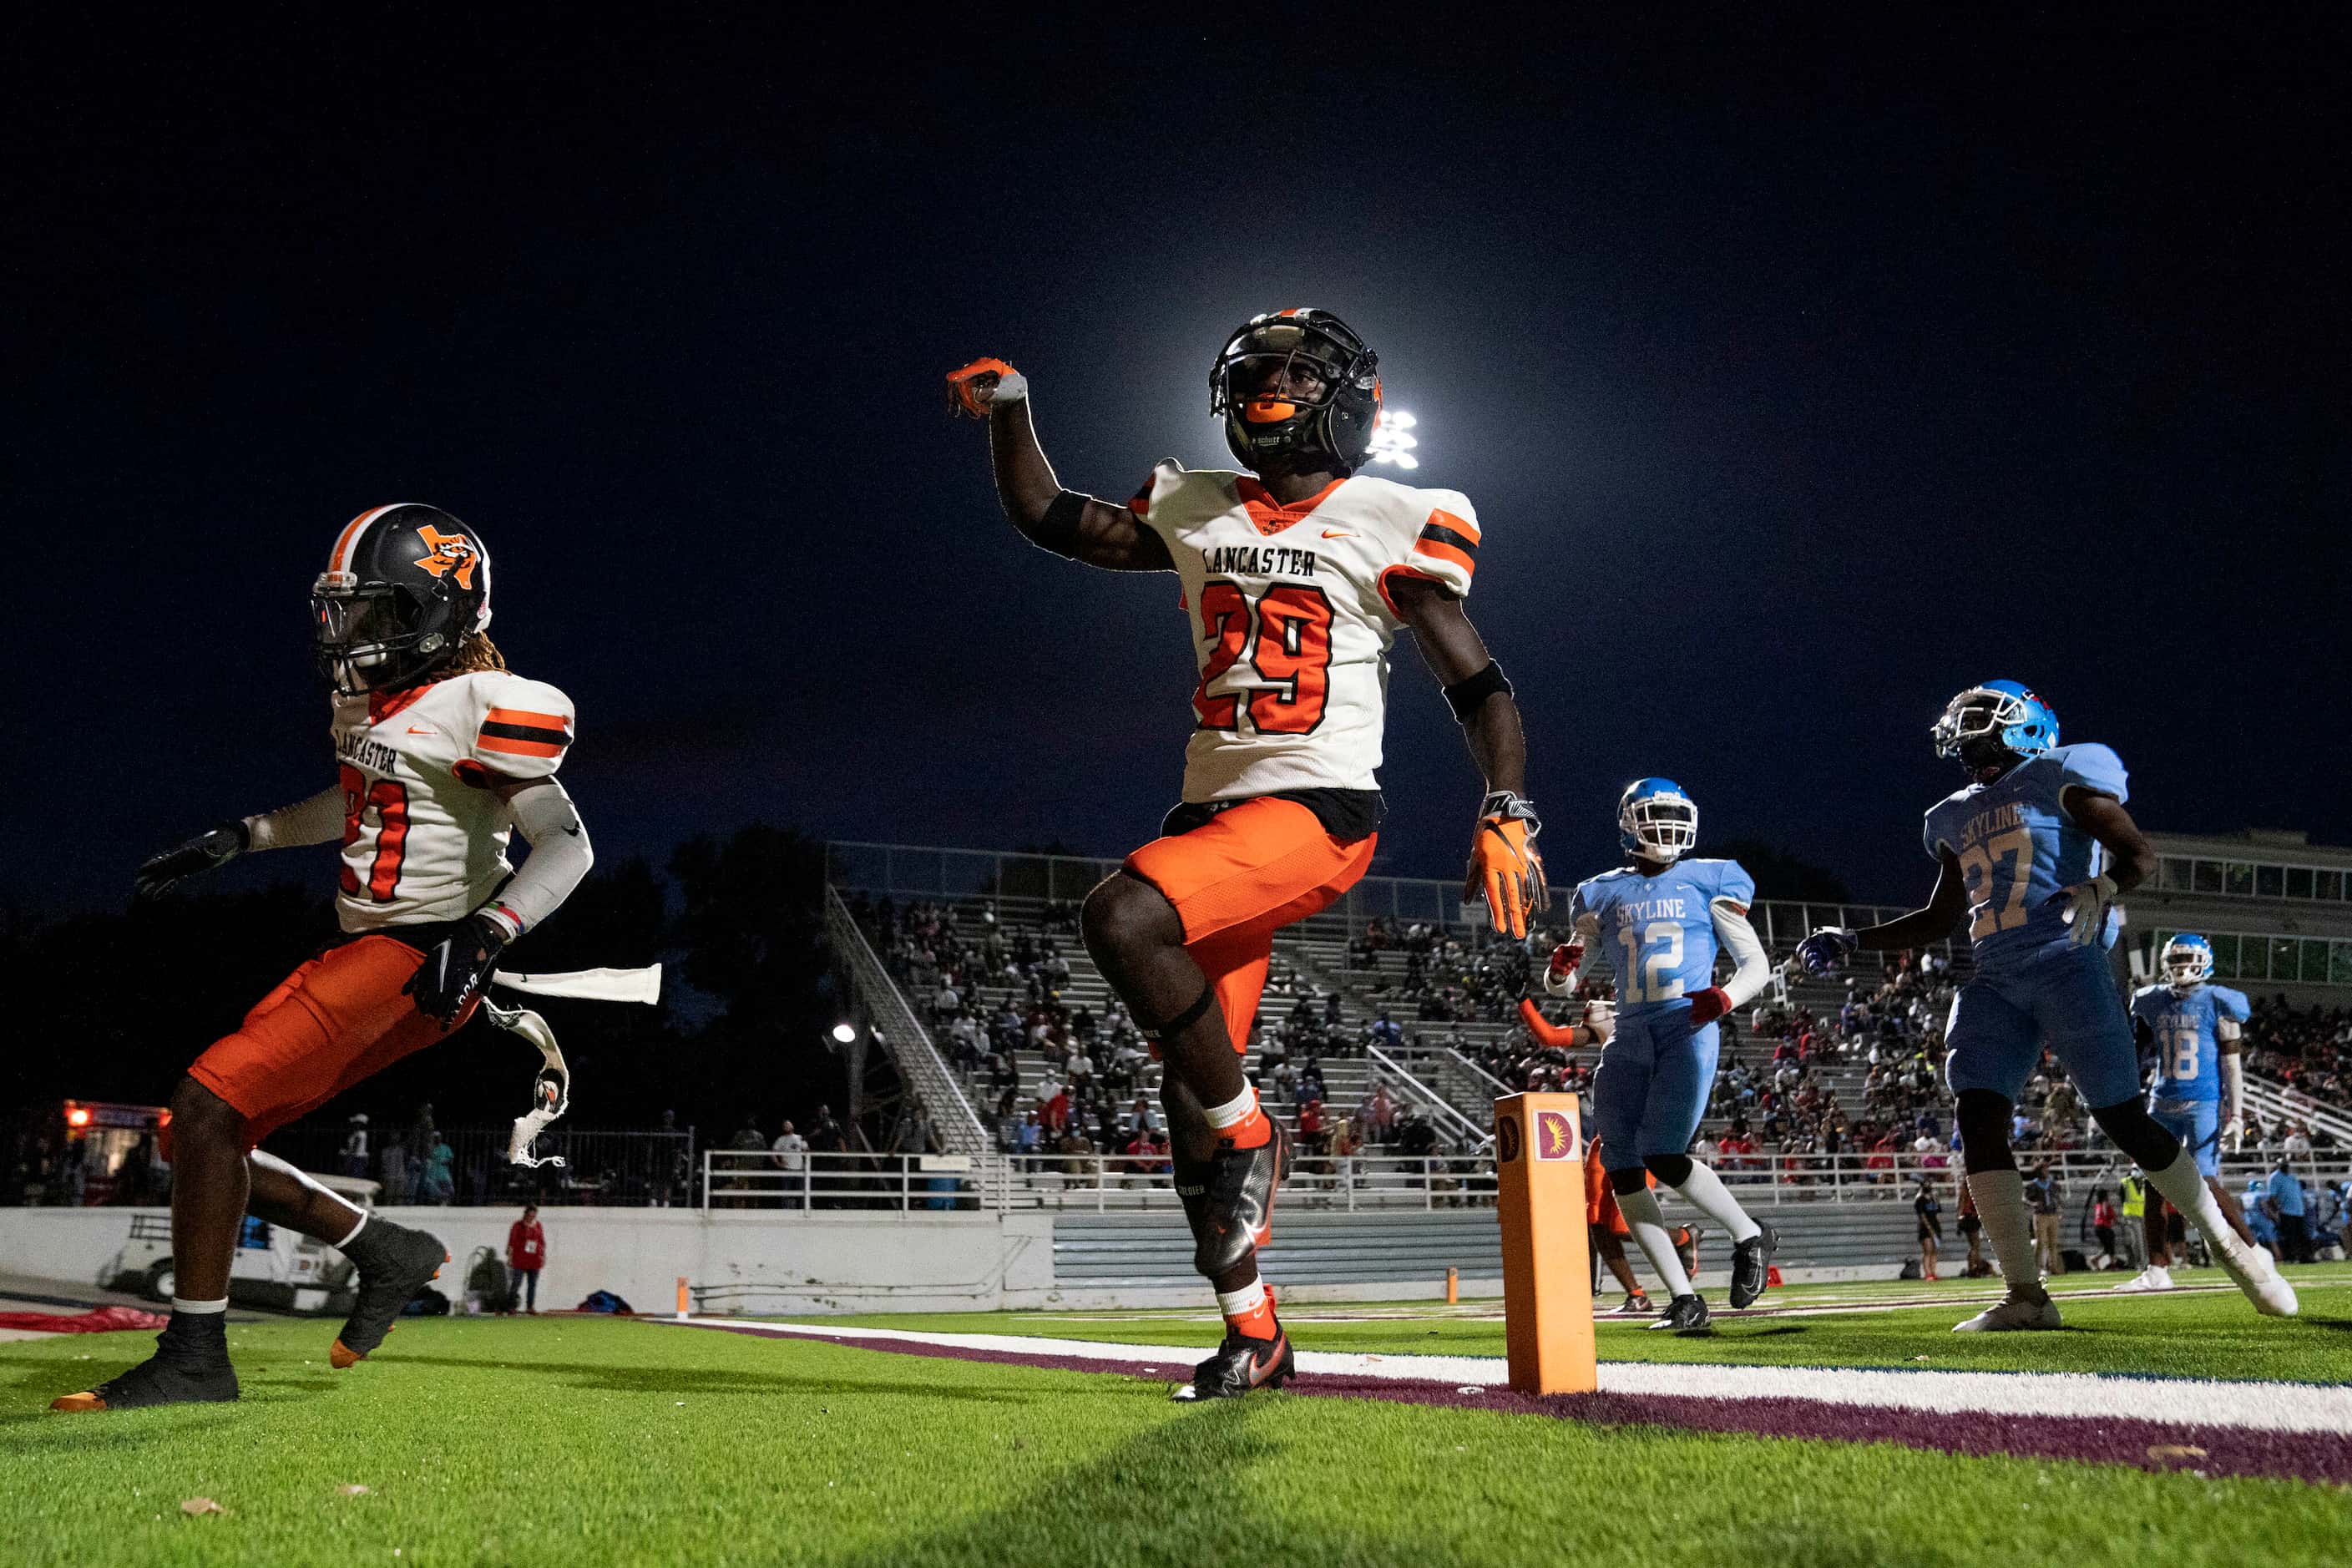 Lancaster defenders celebrate a safety after Skyline snapped the ball out of the back of the...